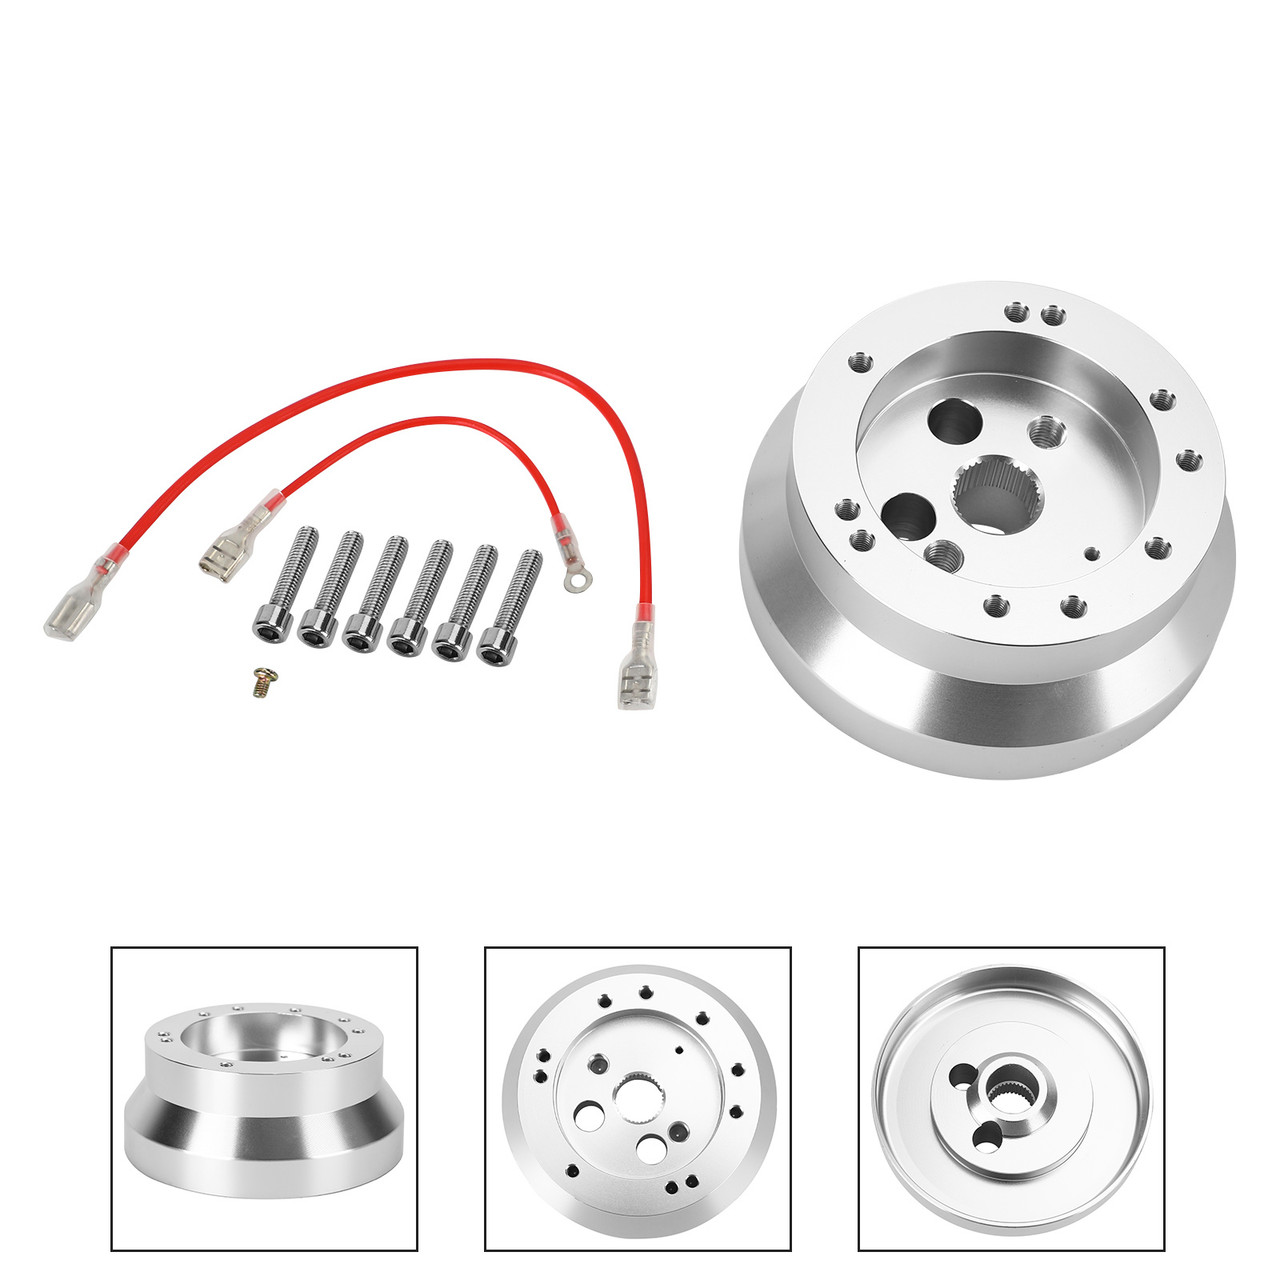 5 & 6 Hole Steering Wheel Short Hub Adapter Kit Fit for CHEVROLET CARS 69-94 Truck 74-94 El Camino Sprint Caballero 68-88 Chevy/GMC 82-94 CORP DOMESTIC CARS 78-81 Silver